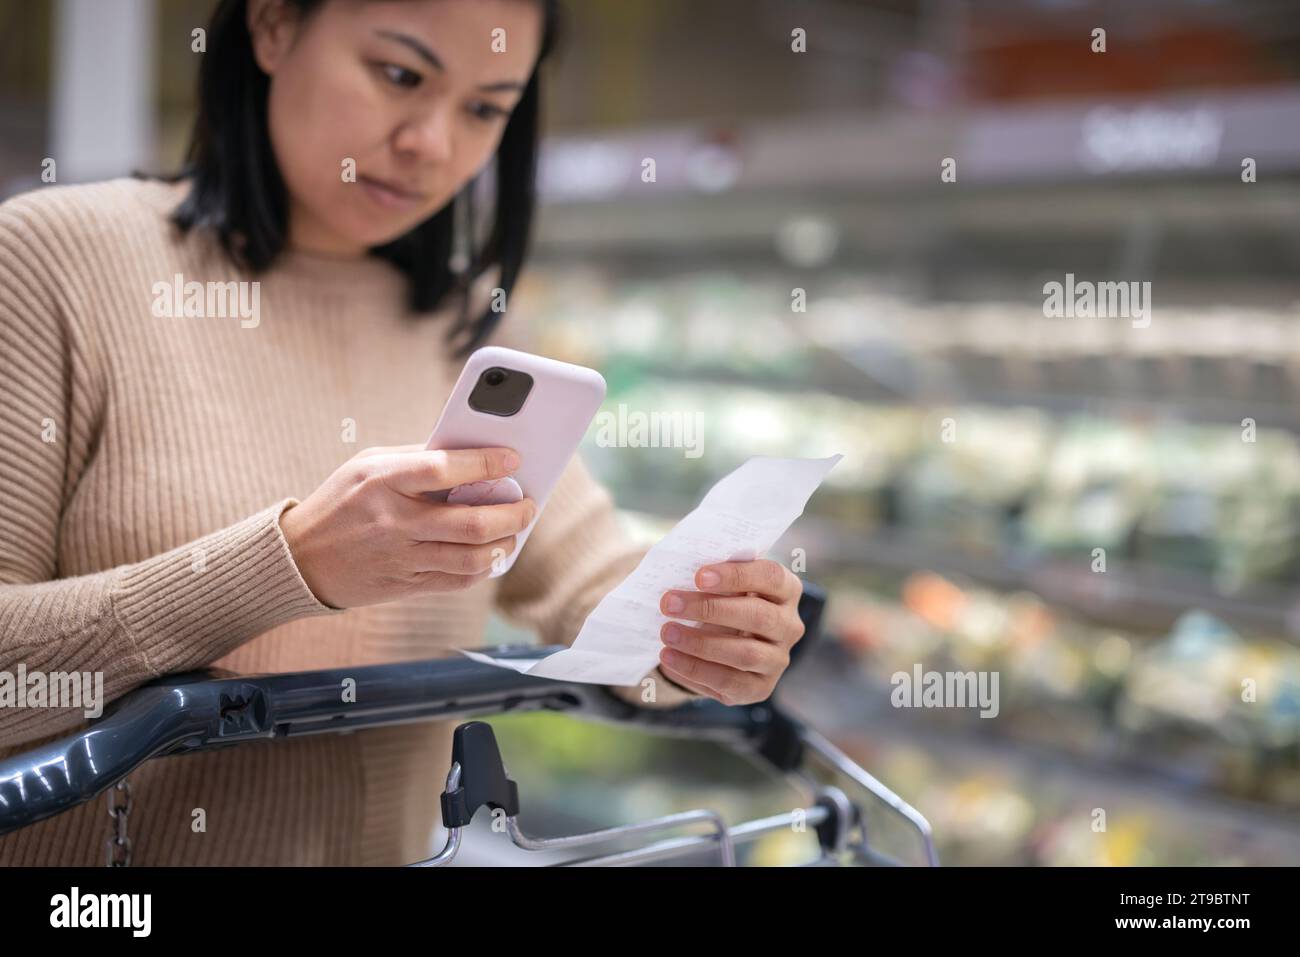 Young woman examining receipt while using smart phone at supermarket Stock Photo